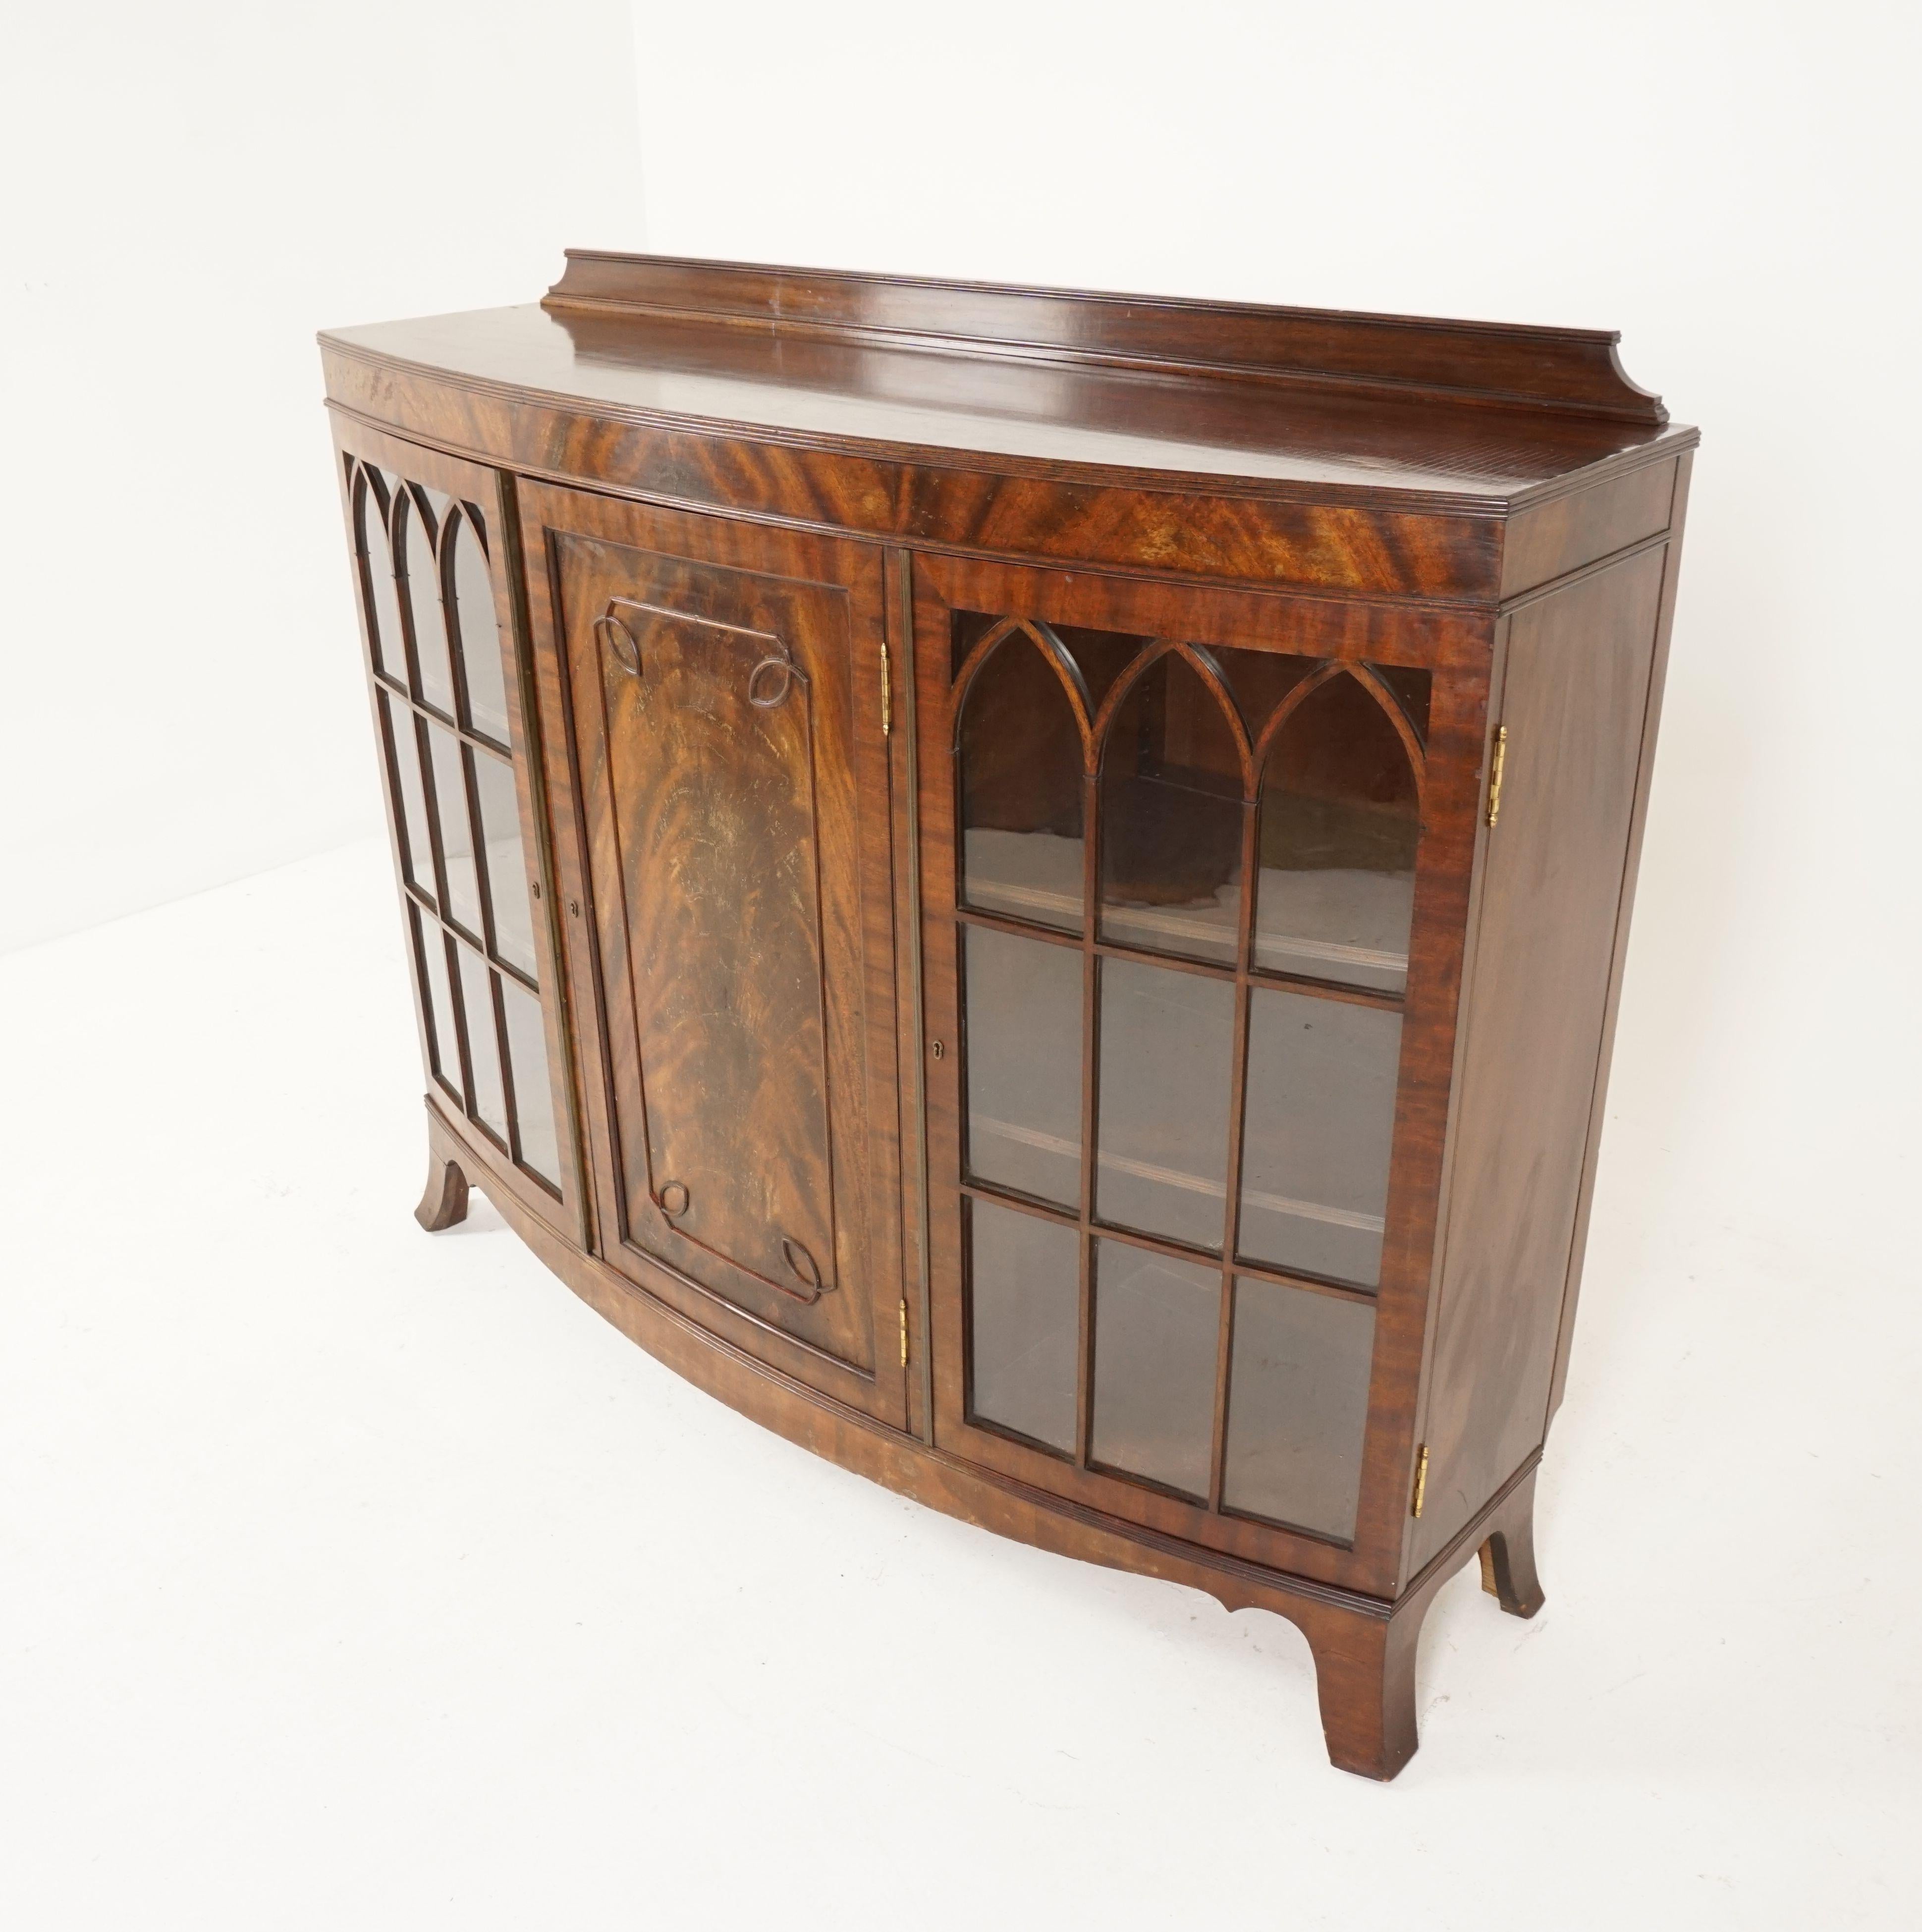 Antique bow front mahogany bookcase, three door display cabinet, Scotland 1920, B2165

Scotland, 1920
Solid mahogany and veneers
Original finish
Shaped pediment on top
Rectangular top with bow front
Paneled center door with two